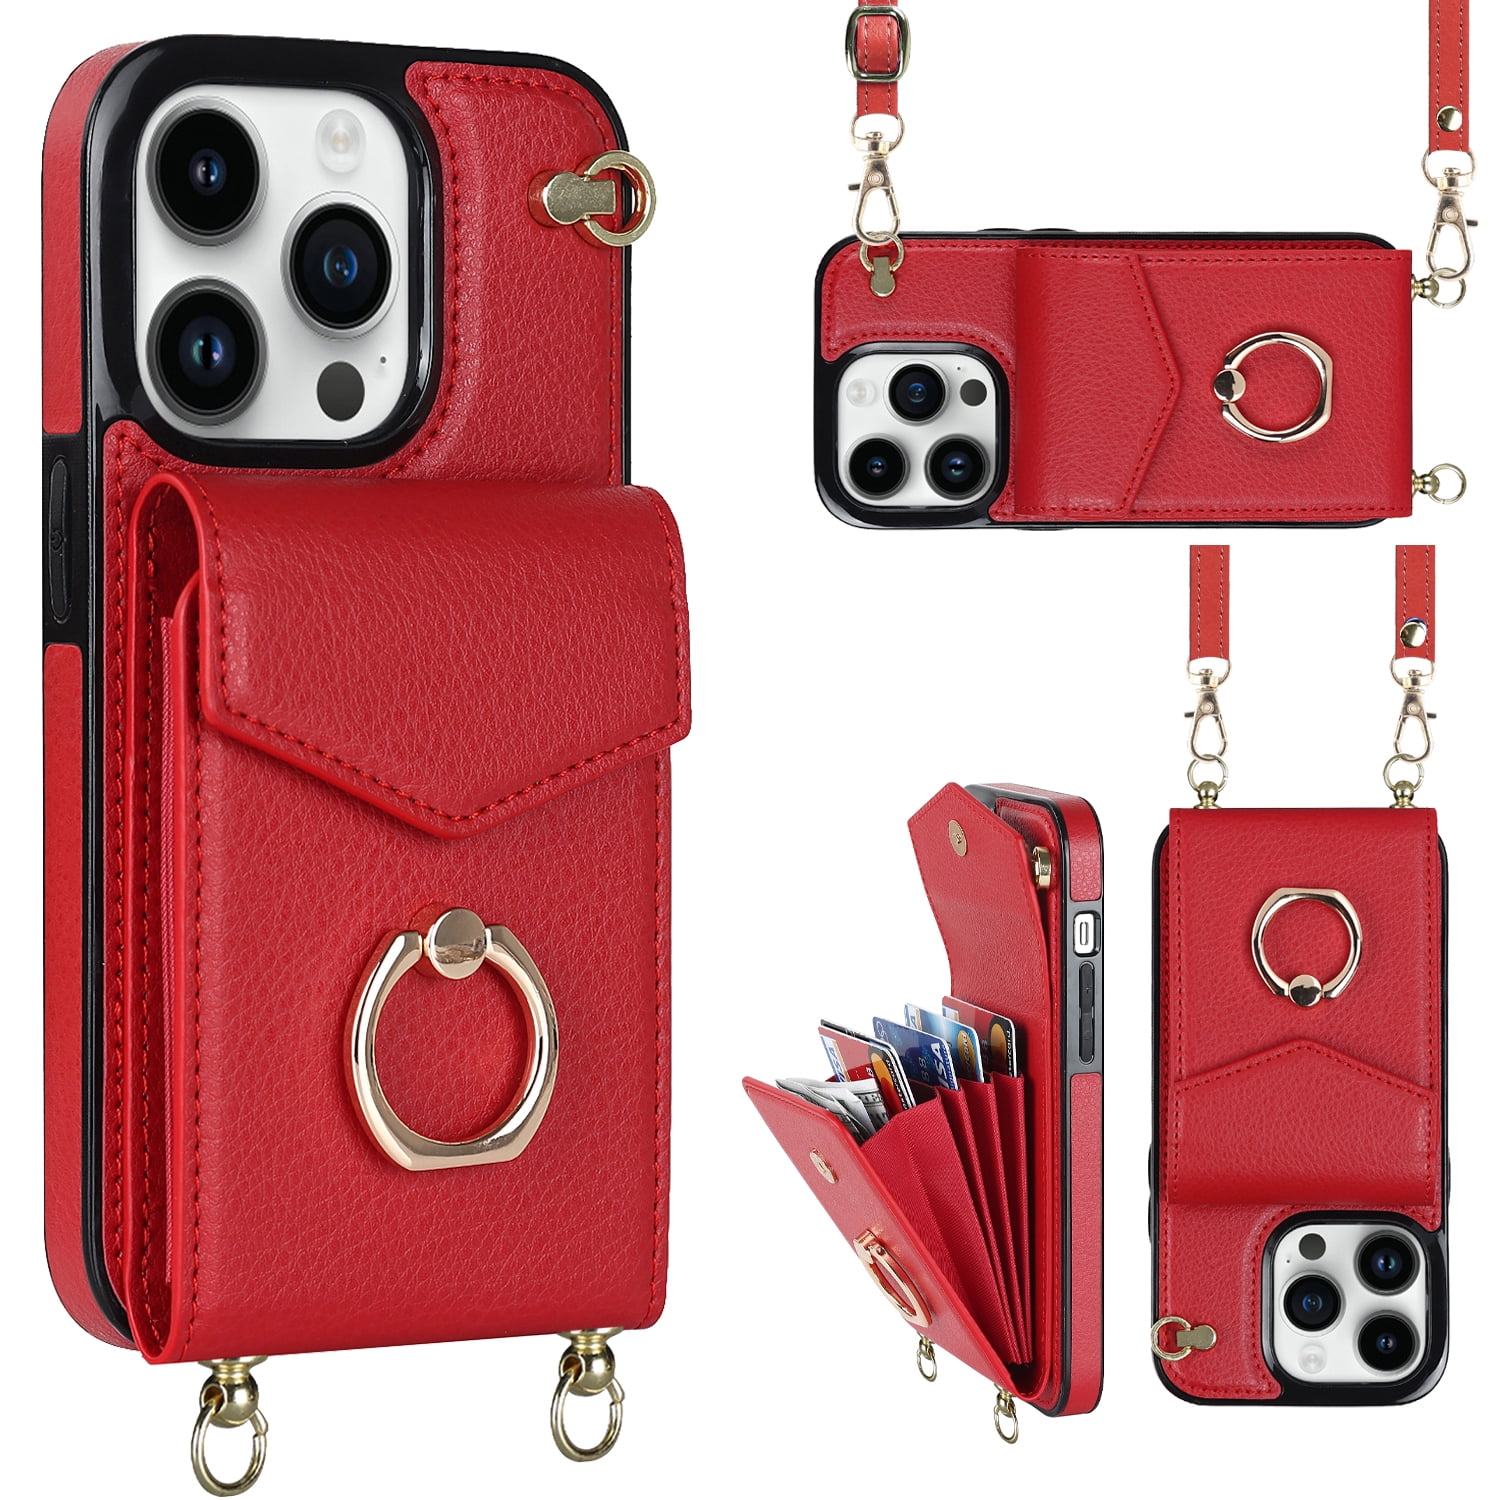 Tarise for Apple iPhone 13 Pro Max Wallet Case for Women Men, iPhone 13 Pro  Max Cover, Embossed PU Leather Magnet Buckle Card Slots Zipper Pocket  Lanyard Wrist Strap Handbag All-inclusive Case